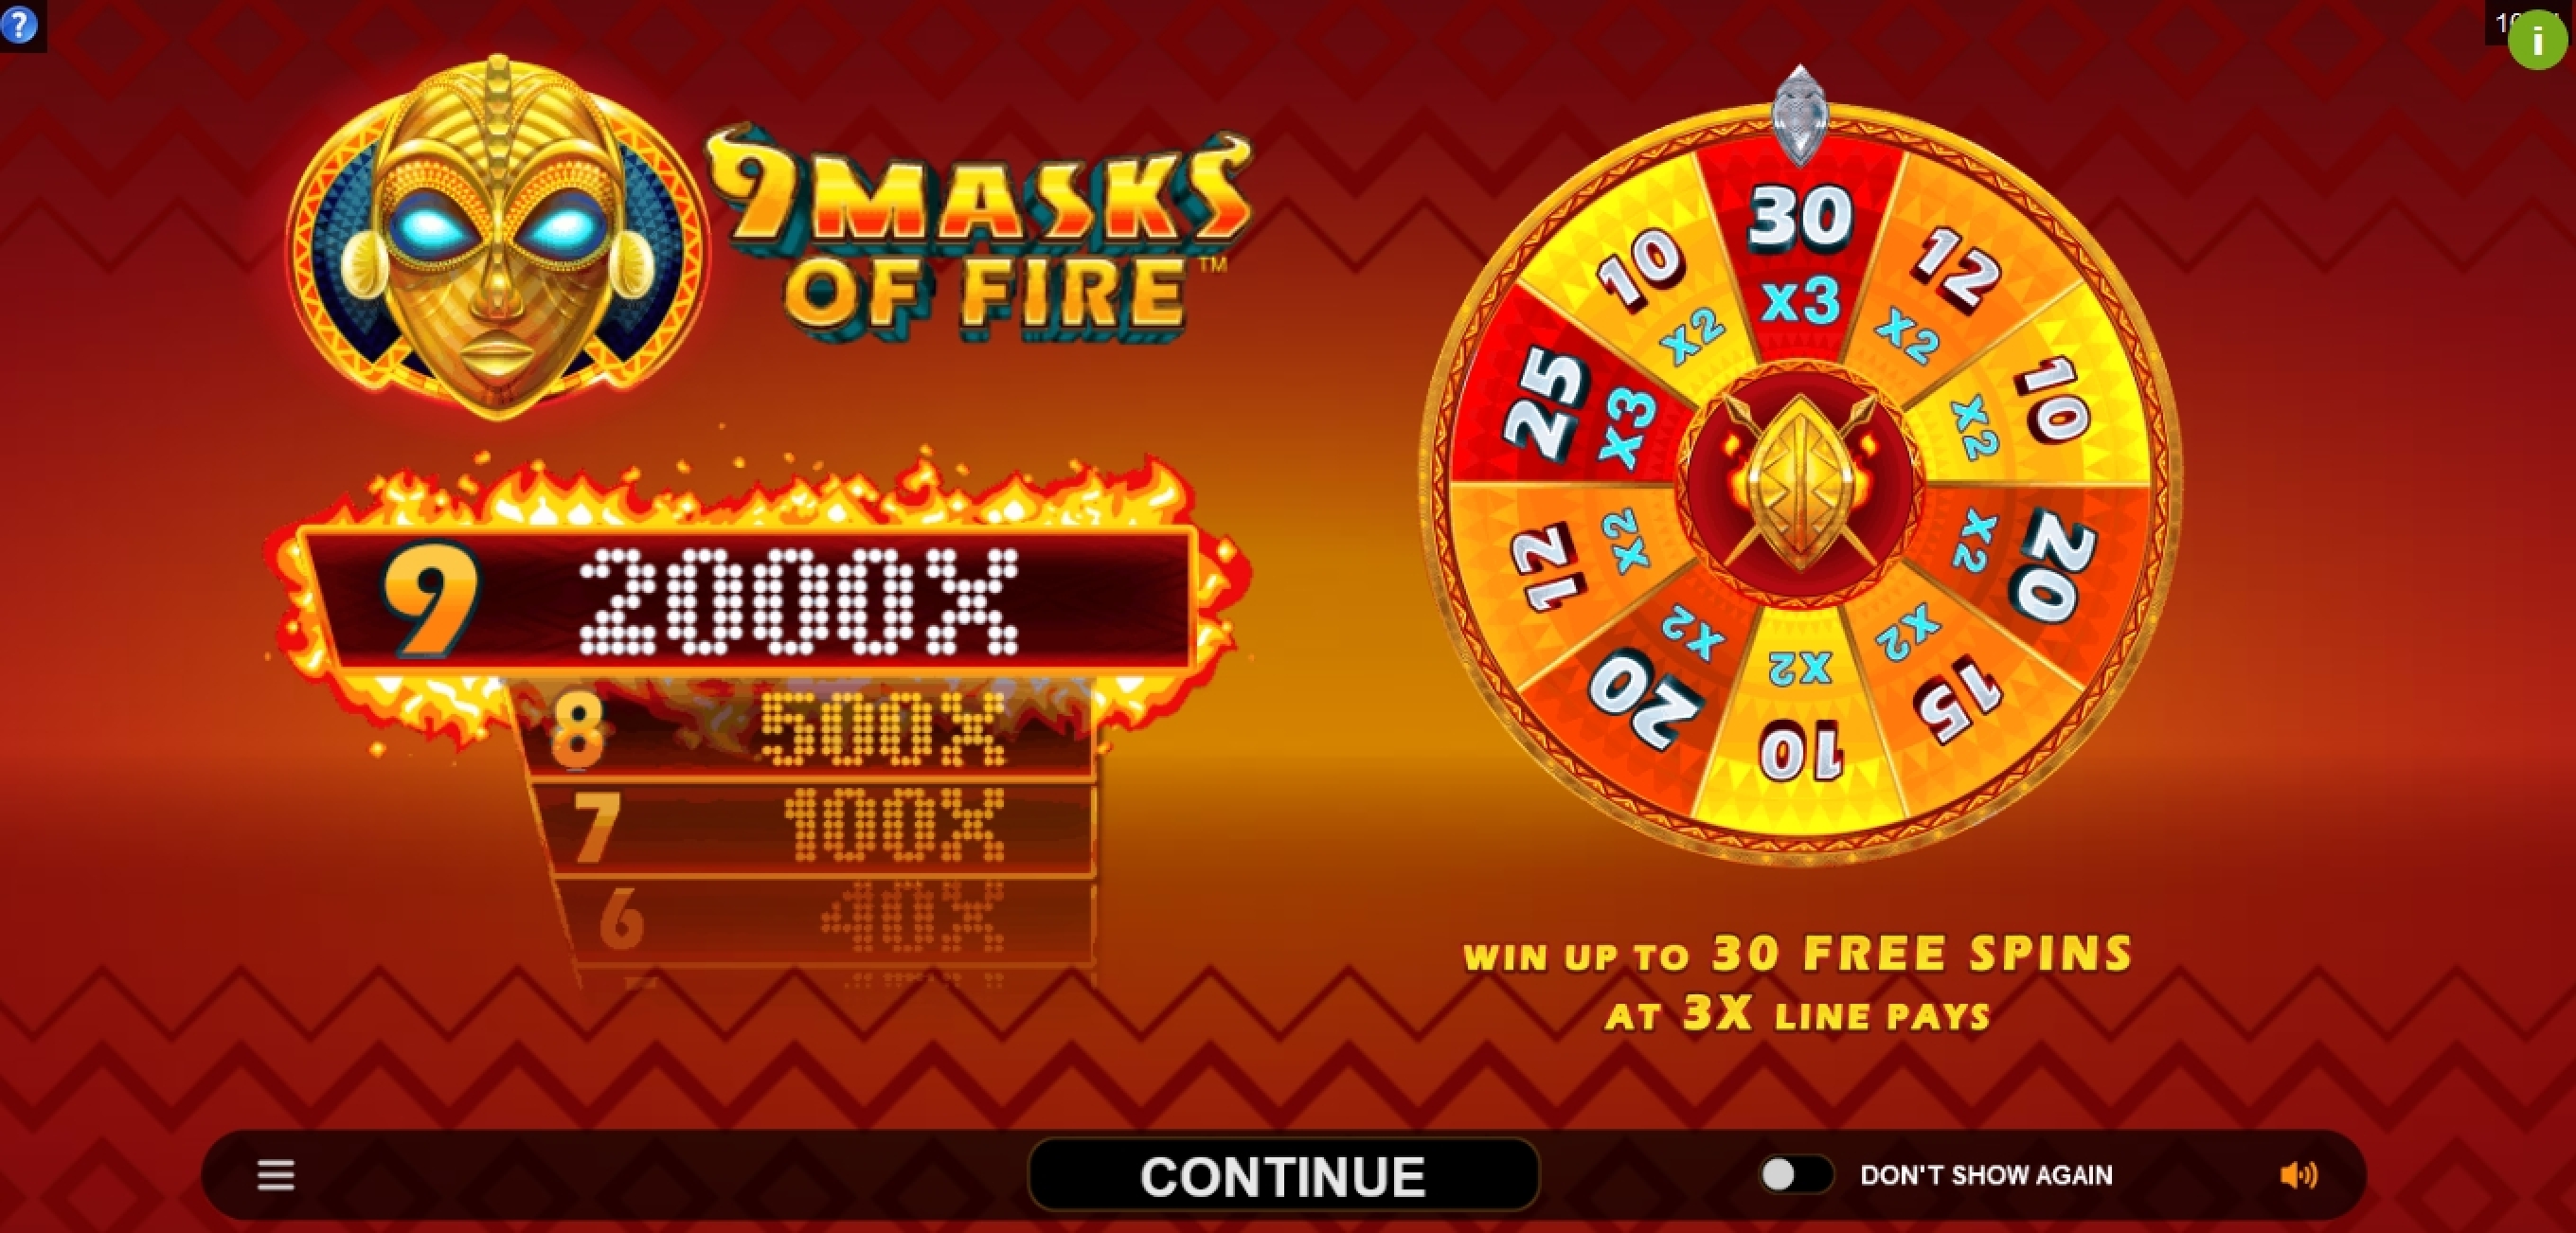 Play 9 Masks Of Fire Free Casino Slot Game by Gameburger Studios